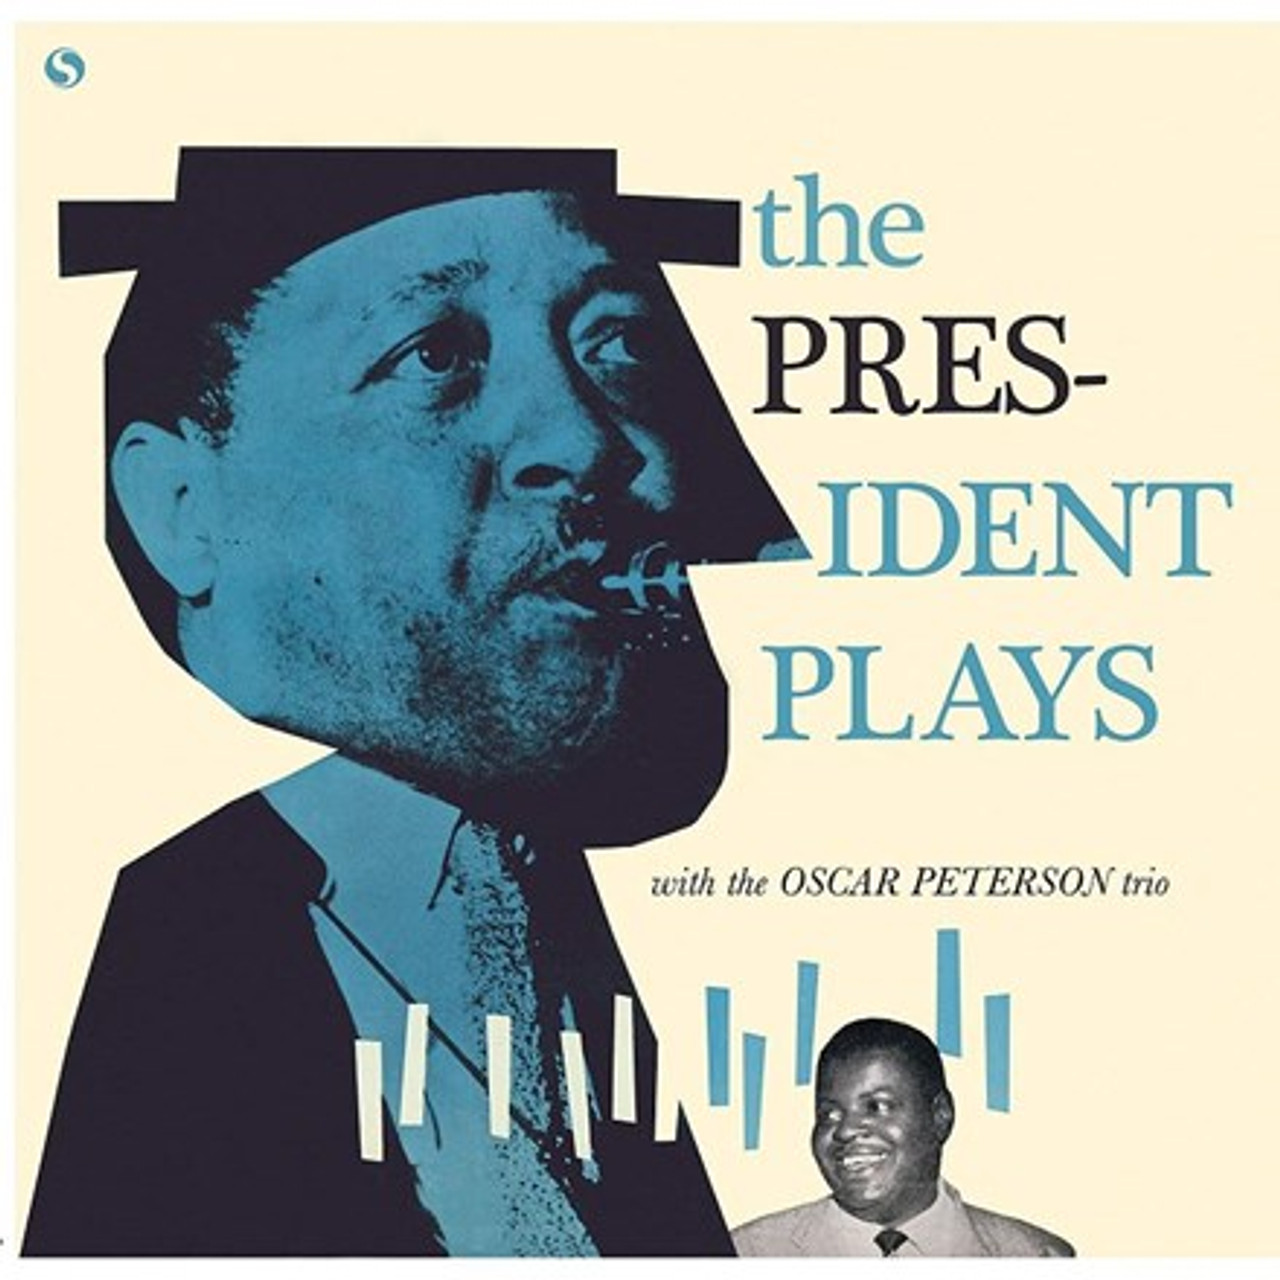 Oscar Peterson Trio w/ Lester Young - The President Plays W/ the